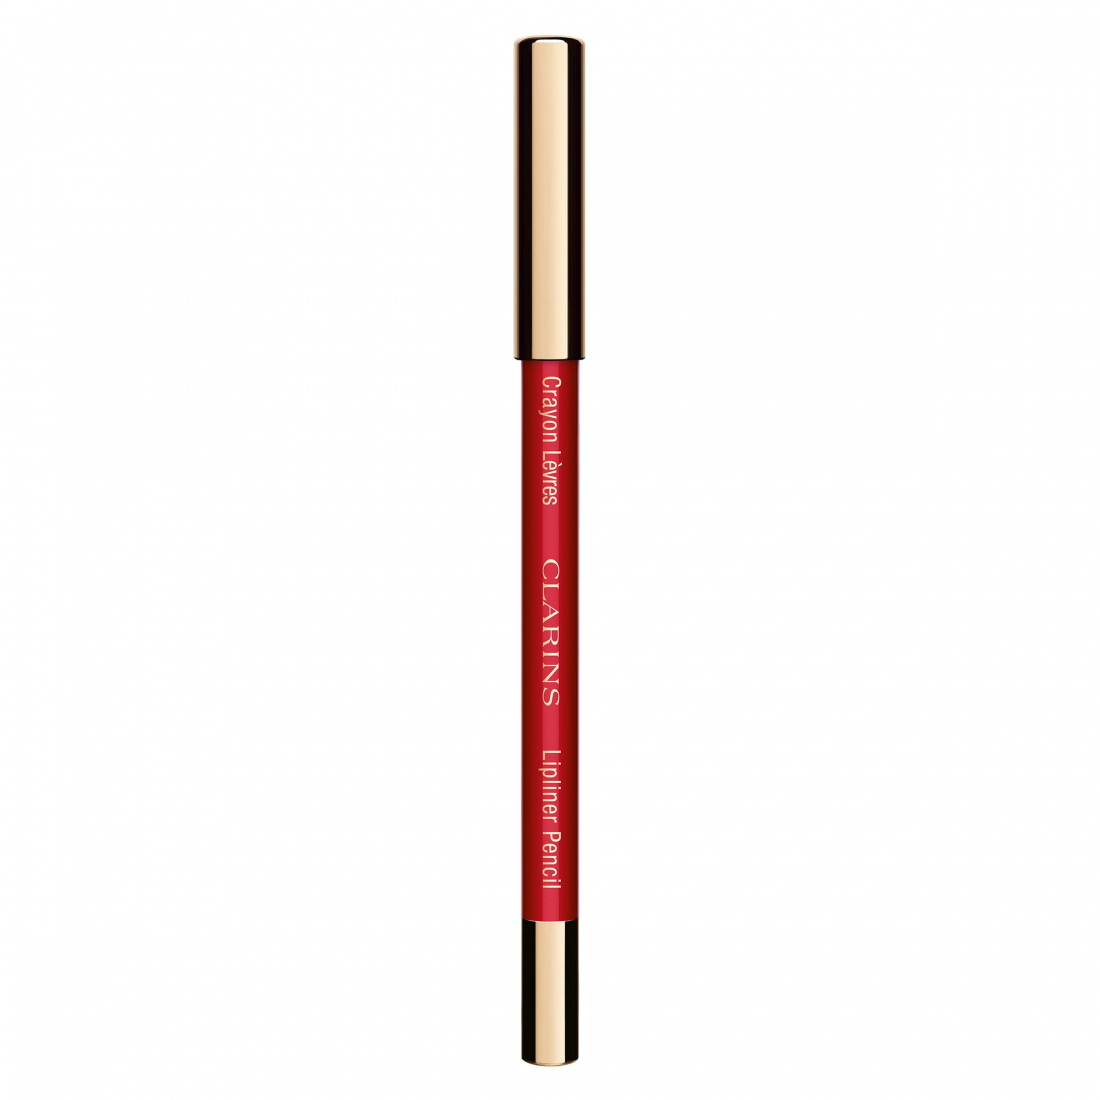 'Crayon' Lippen-Liner - 06 Red 1.2 g